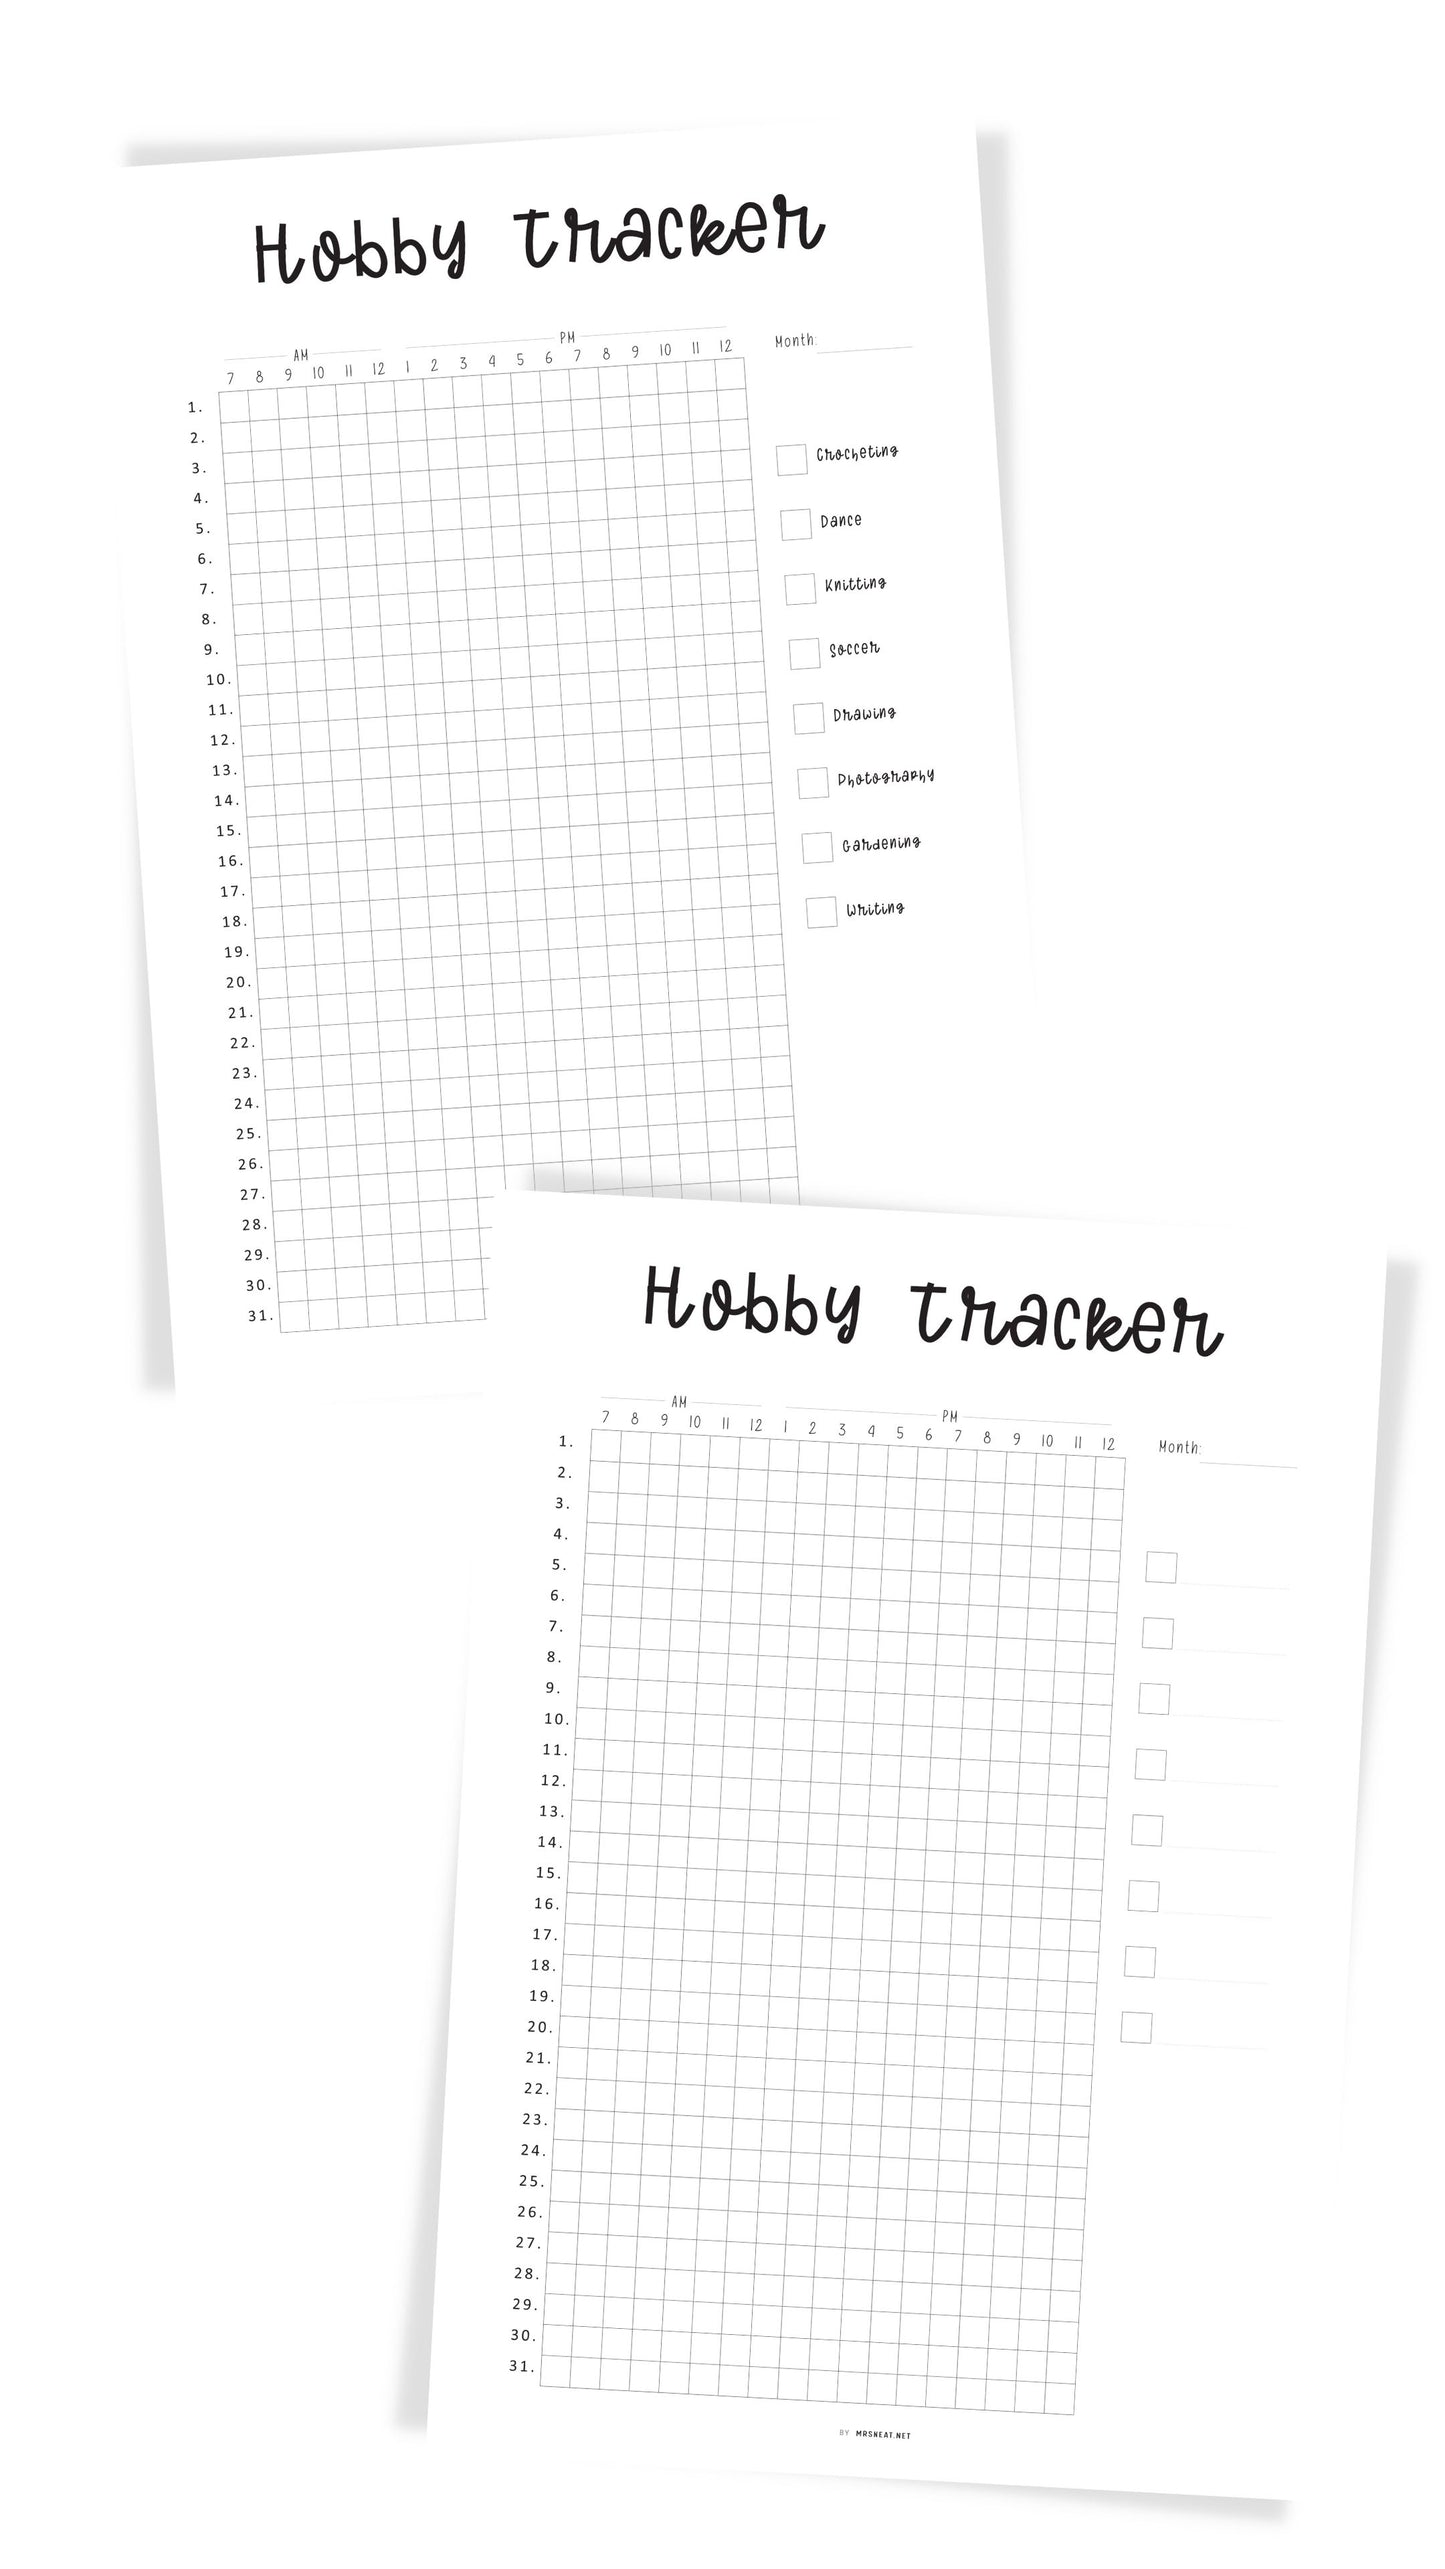 Monthly Hobby Tracker Template printable